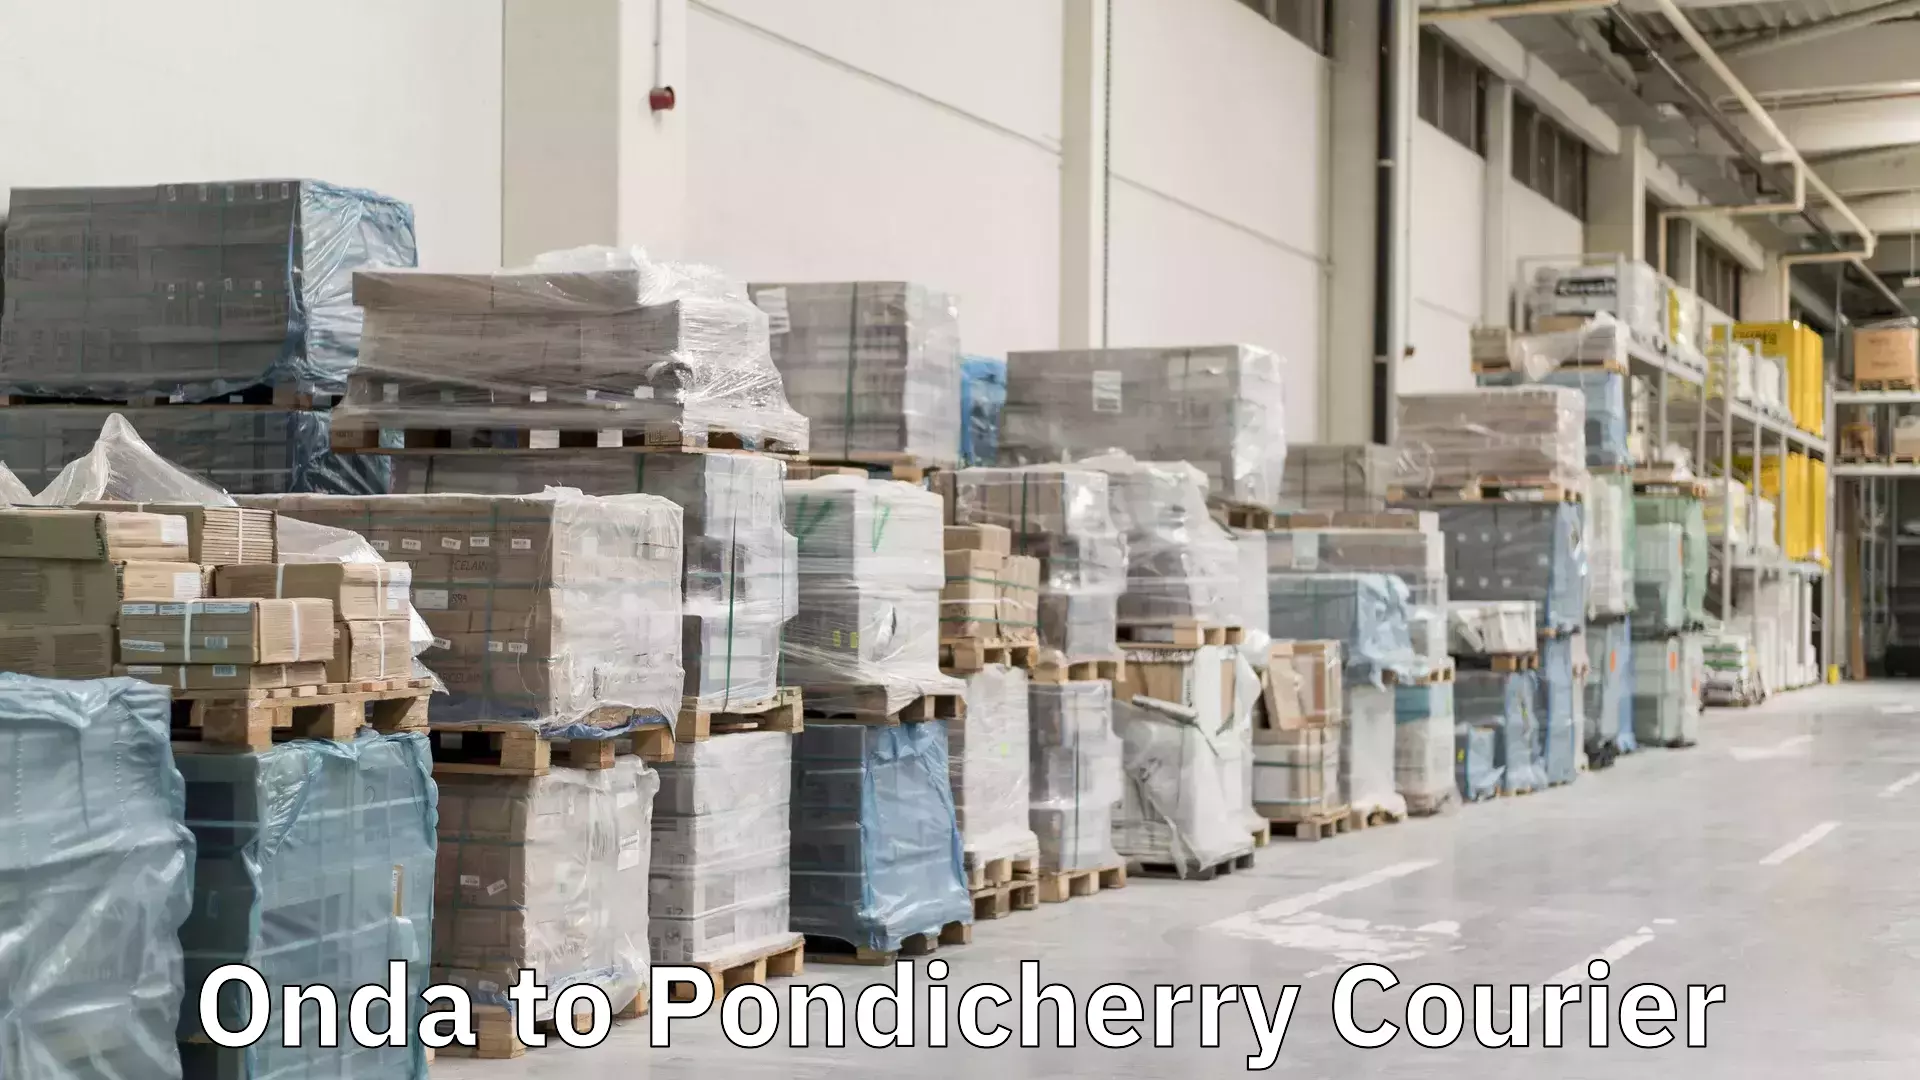 Global shipping solutions Onda to Pondicherry